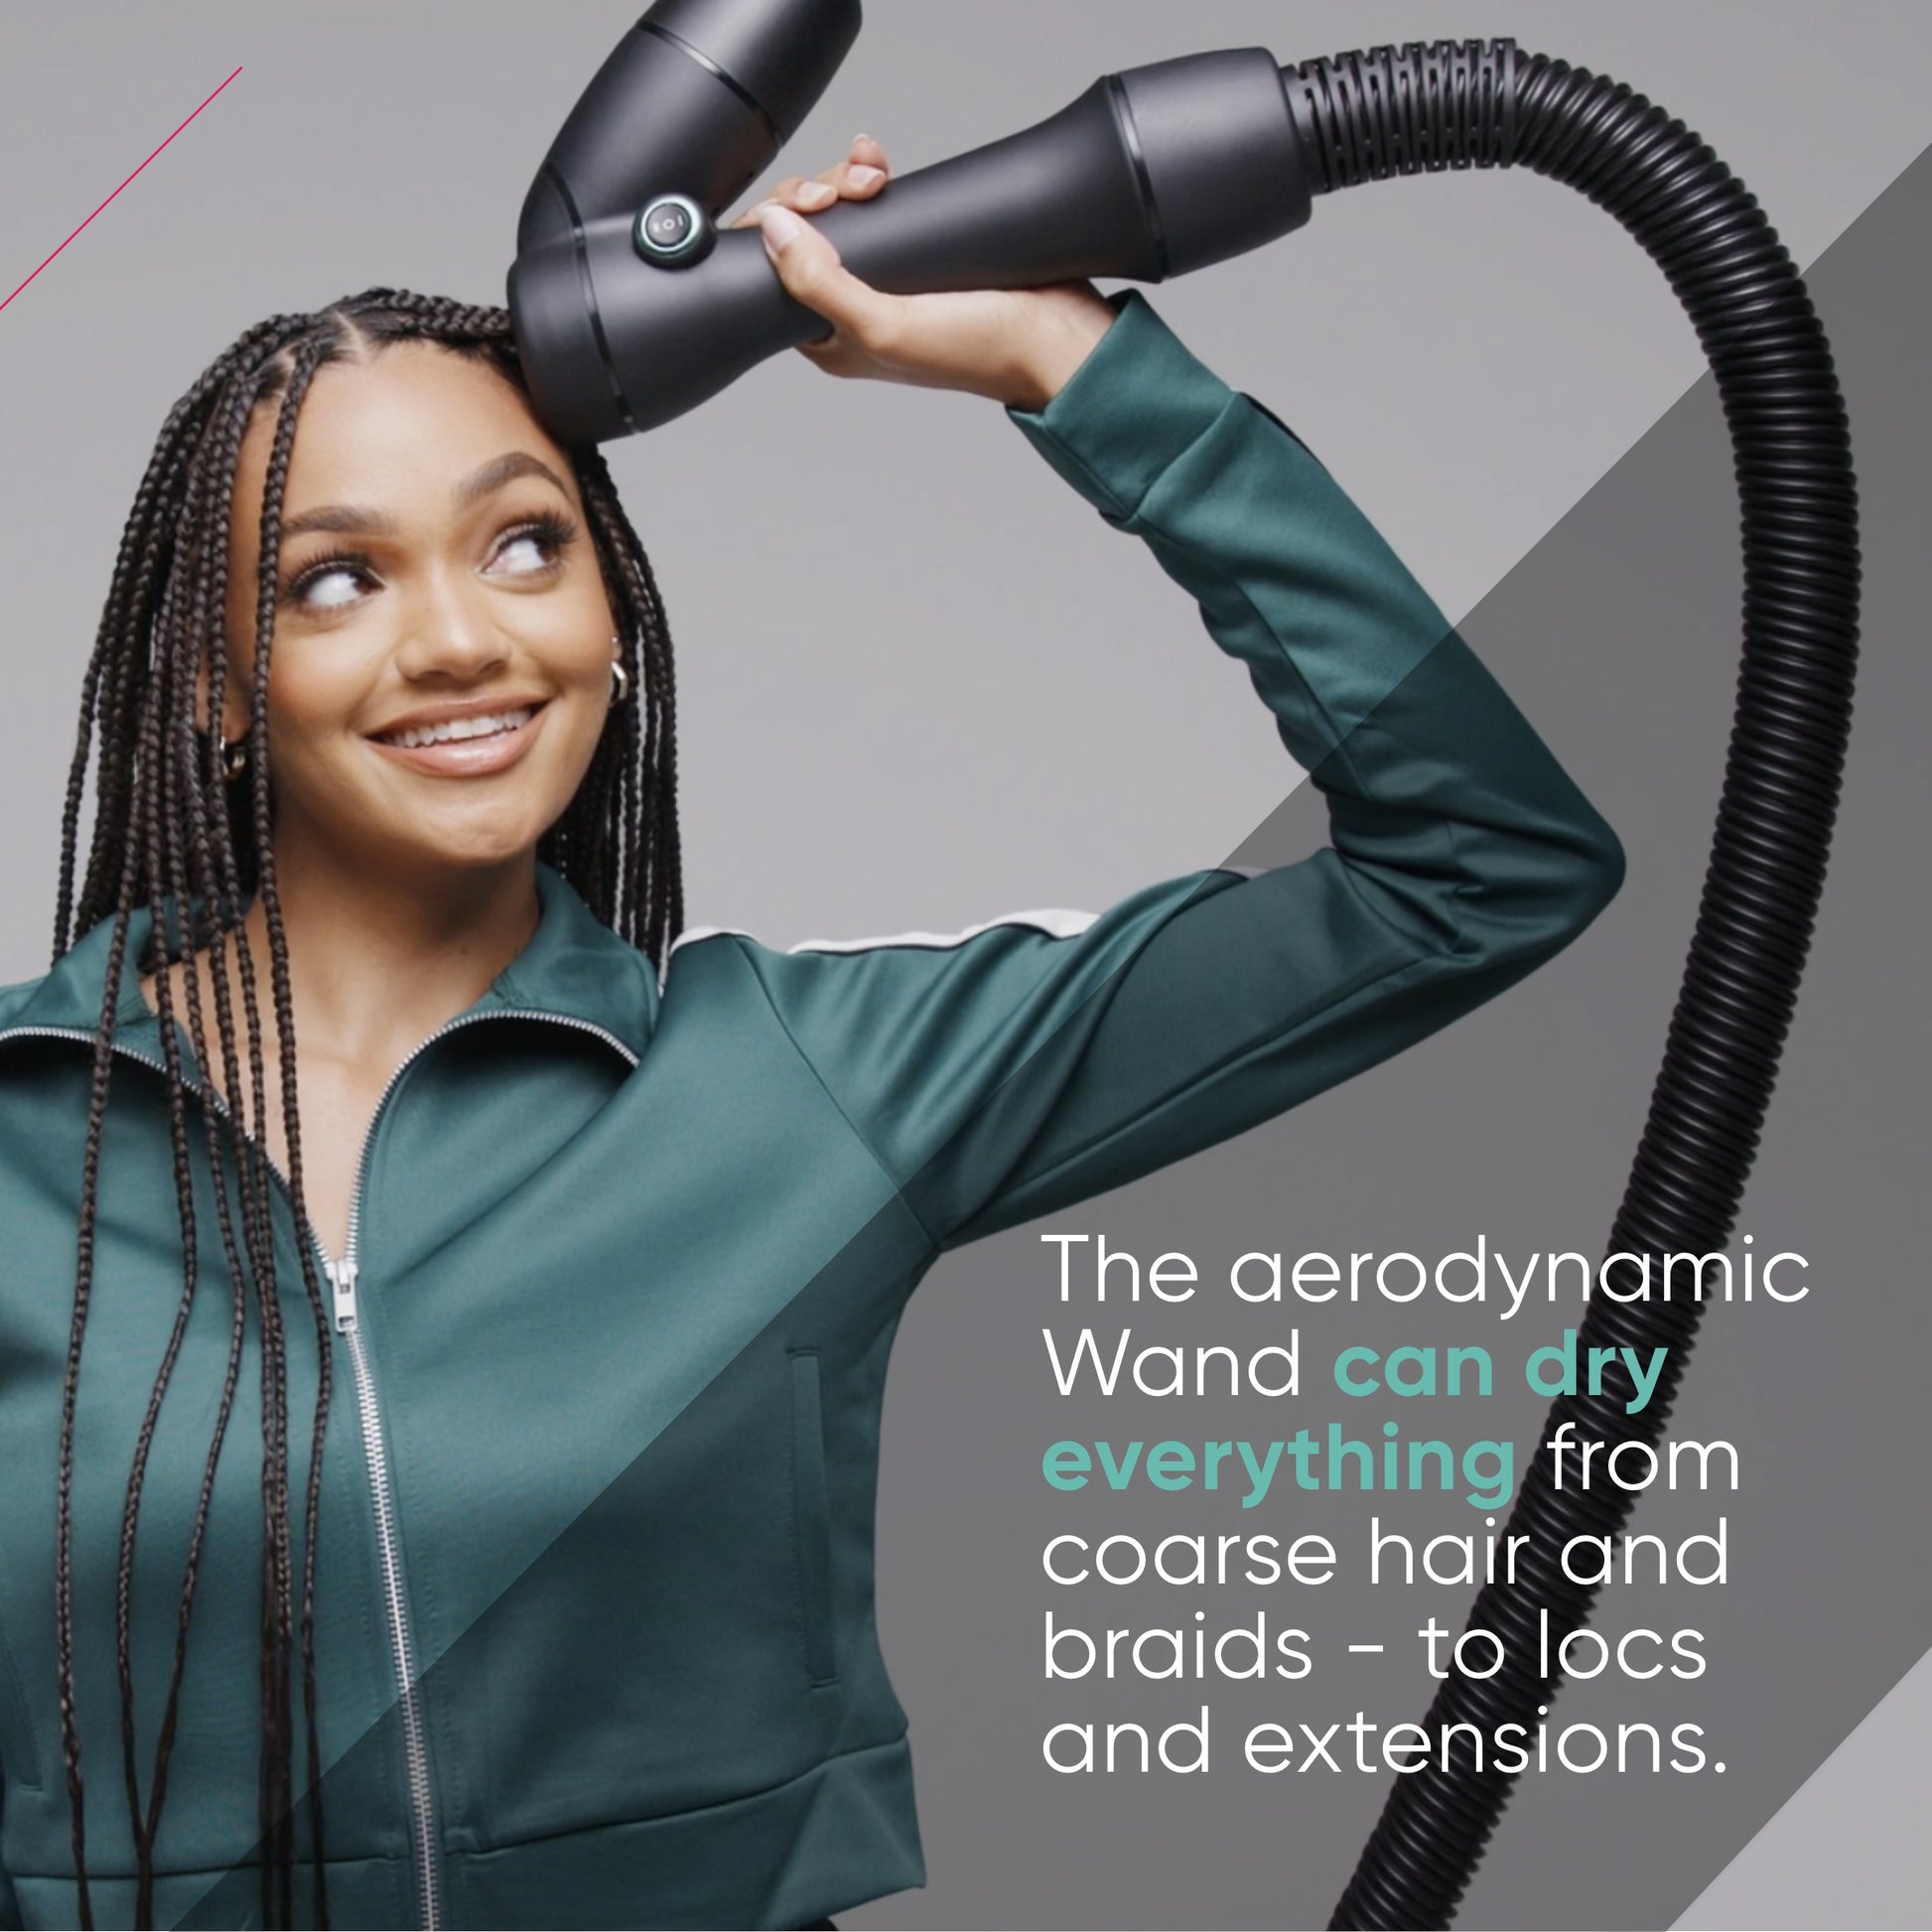 The aerodynamic wand can dry everything from coarse hair and braids to locs and extenstions.